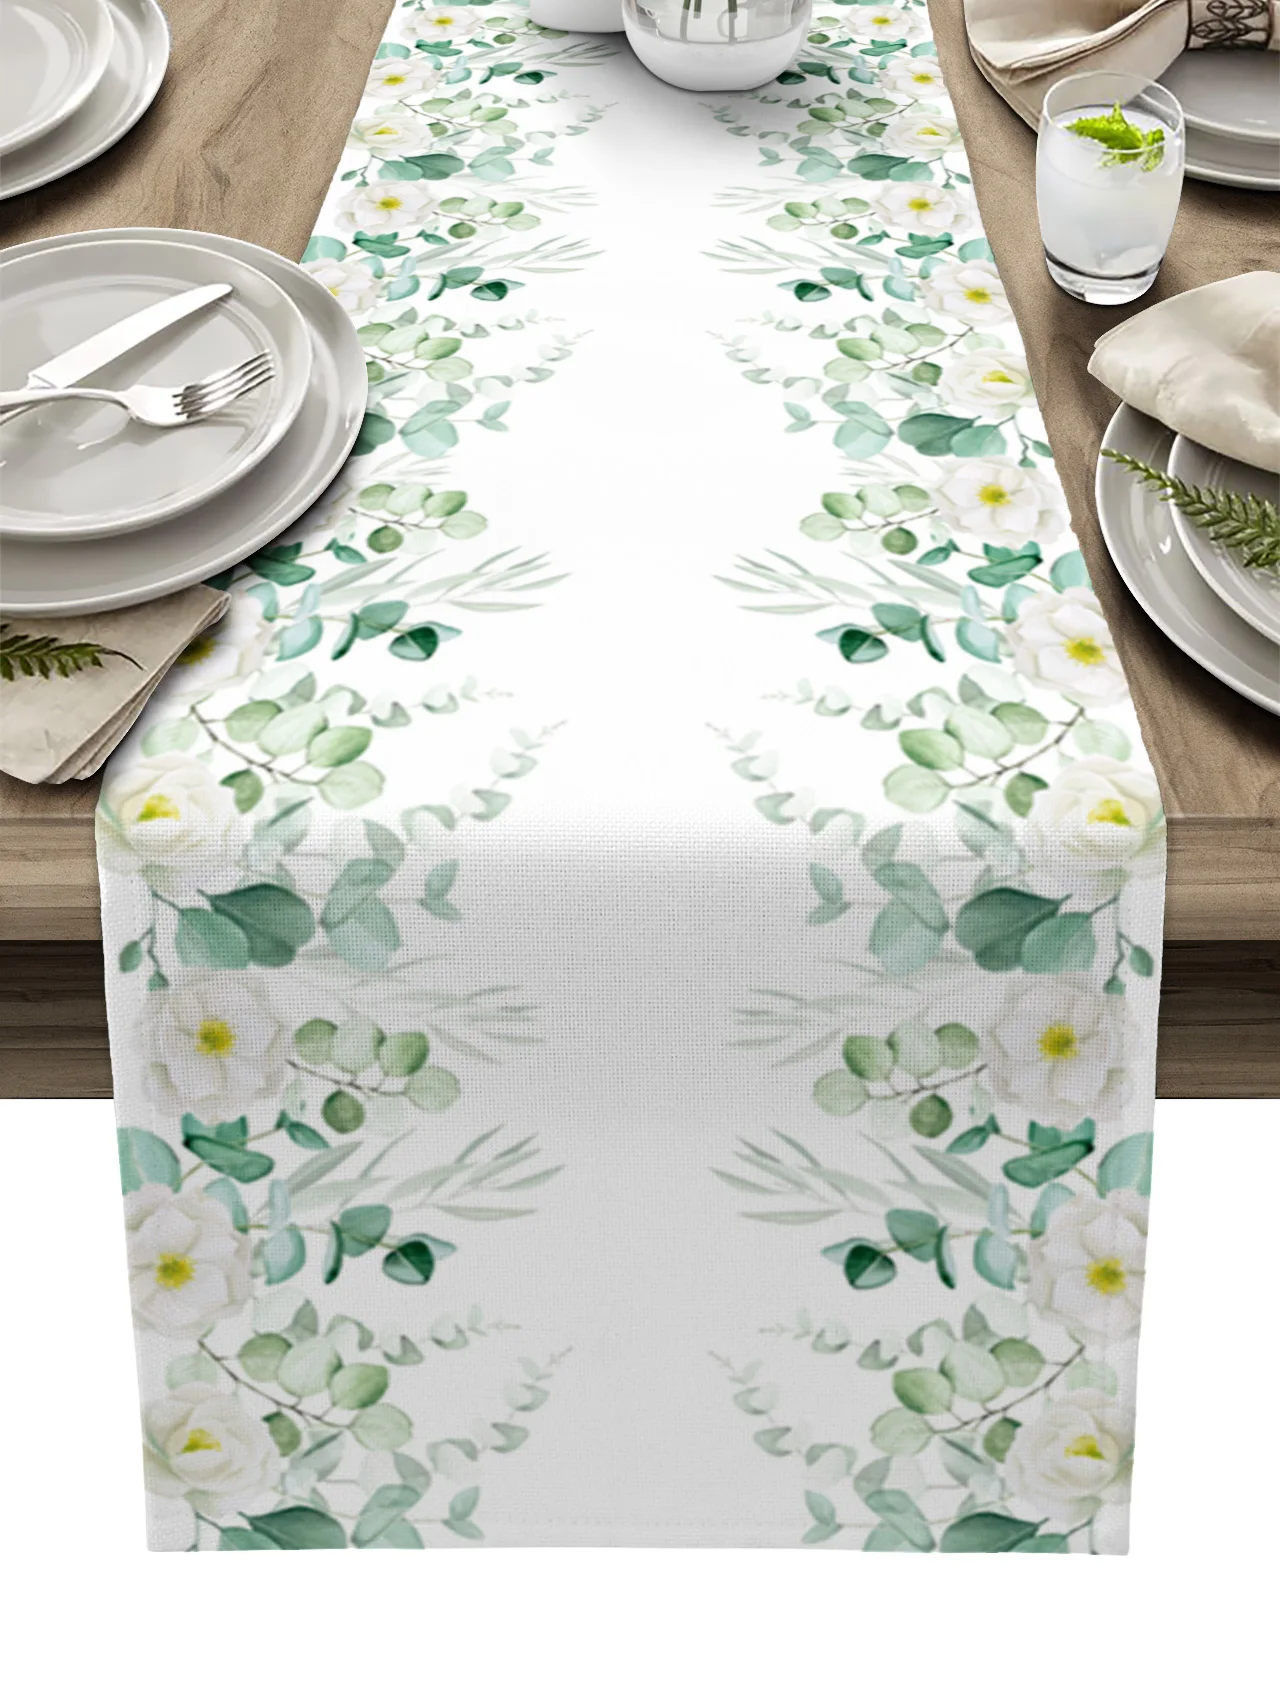 

Watercolor Plant Eucalyptus Leaf Flower Table Runner luxury Kitchen Dinner Table Cover Wedding Party Decor Linen Tablecloth